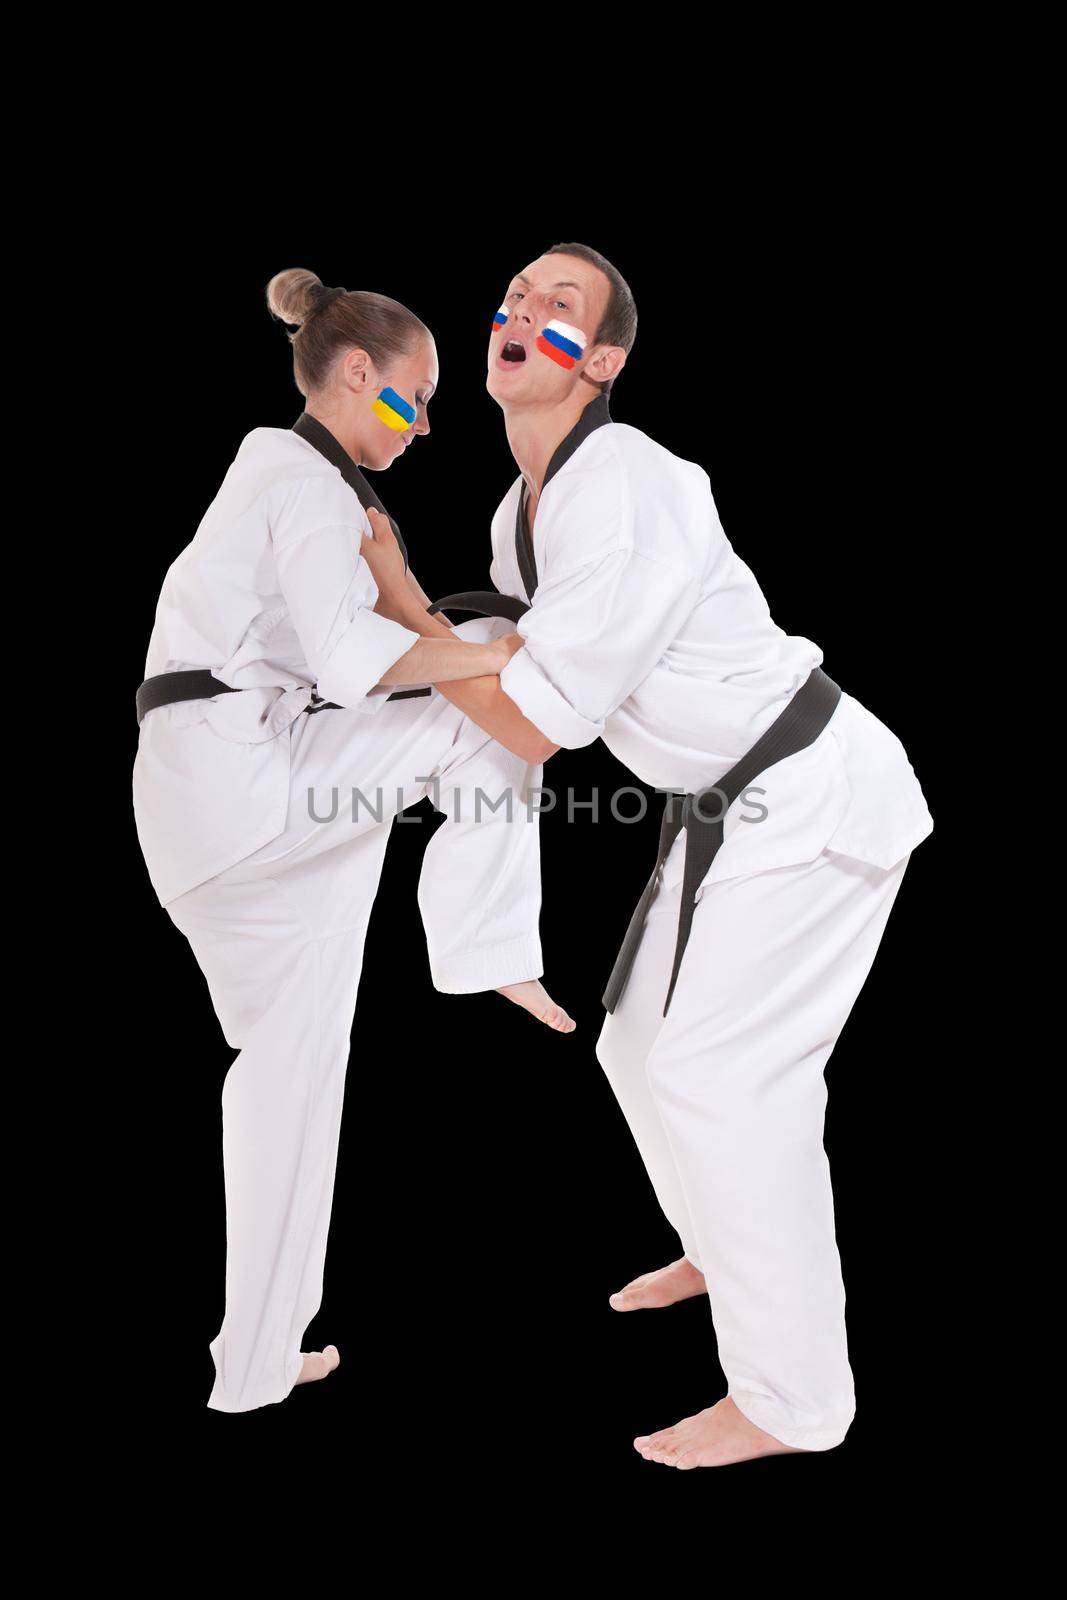 Defense kick of Ukraine and Russia two fighting representatives of different countries. Woman make ankle kick to a man, two fighting people isolated on black background by LipikStockMedia